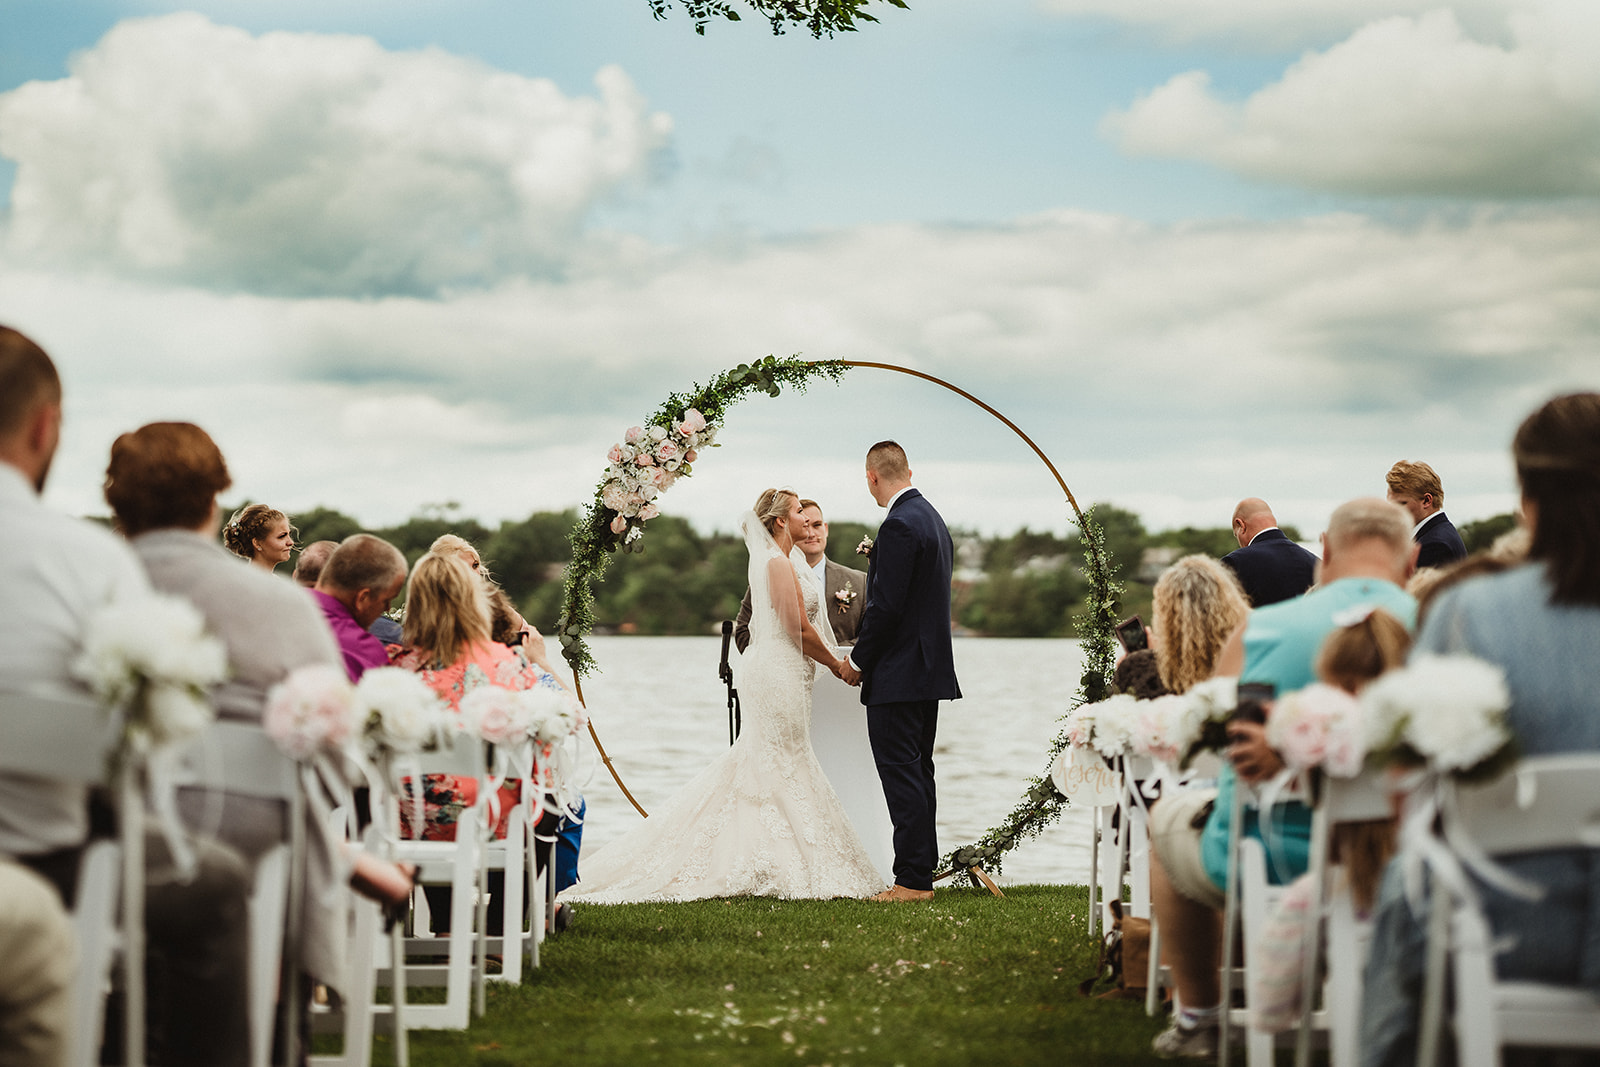 Family and friends attend a beautiful waterfront wedding ceremony on a cloudy Wisconsin day. Wedding arch inspo Ceremony photos Lakeside wedding #wisconsinweddingphotographer #choosingaphotographer #lakesidewedding #waterfrontweddingceremony